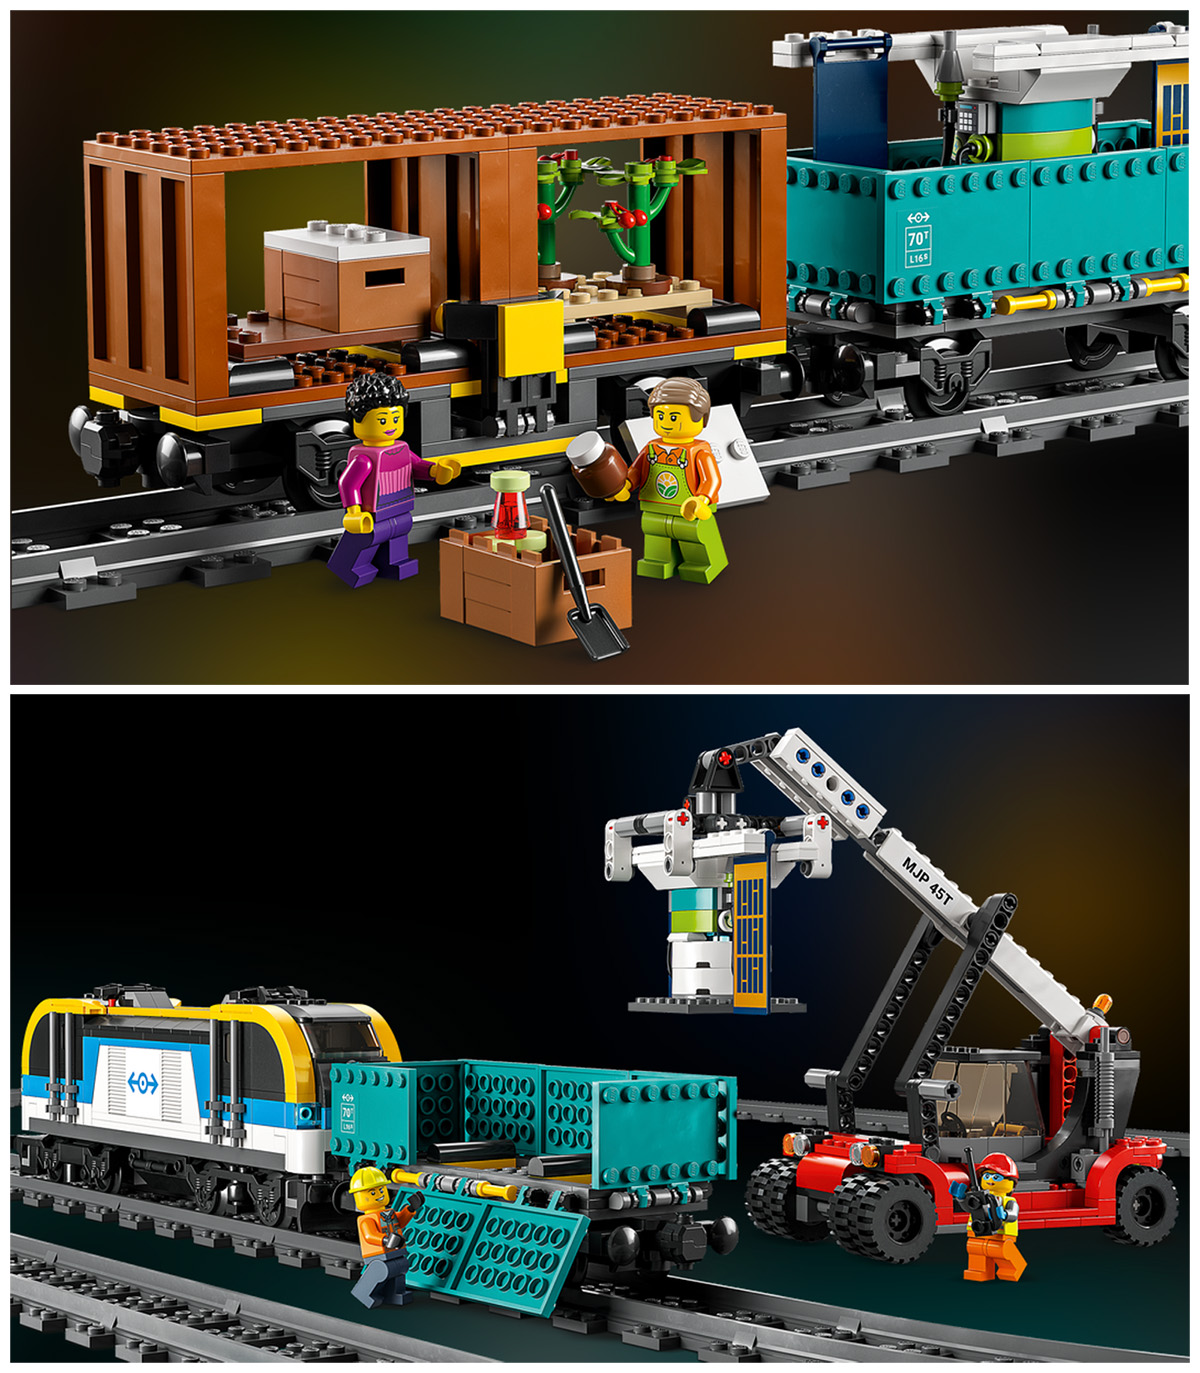 LEGO® - 60336 - Freight Train - New exclusive unofficial images 